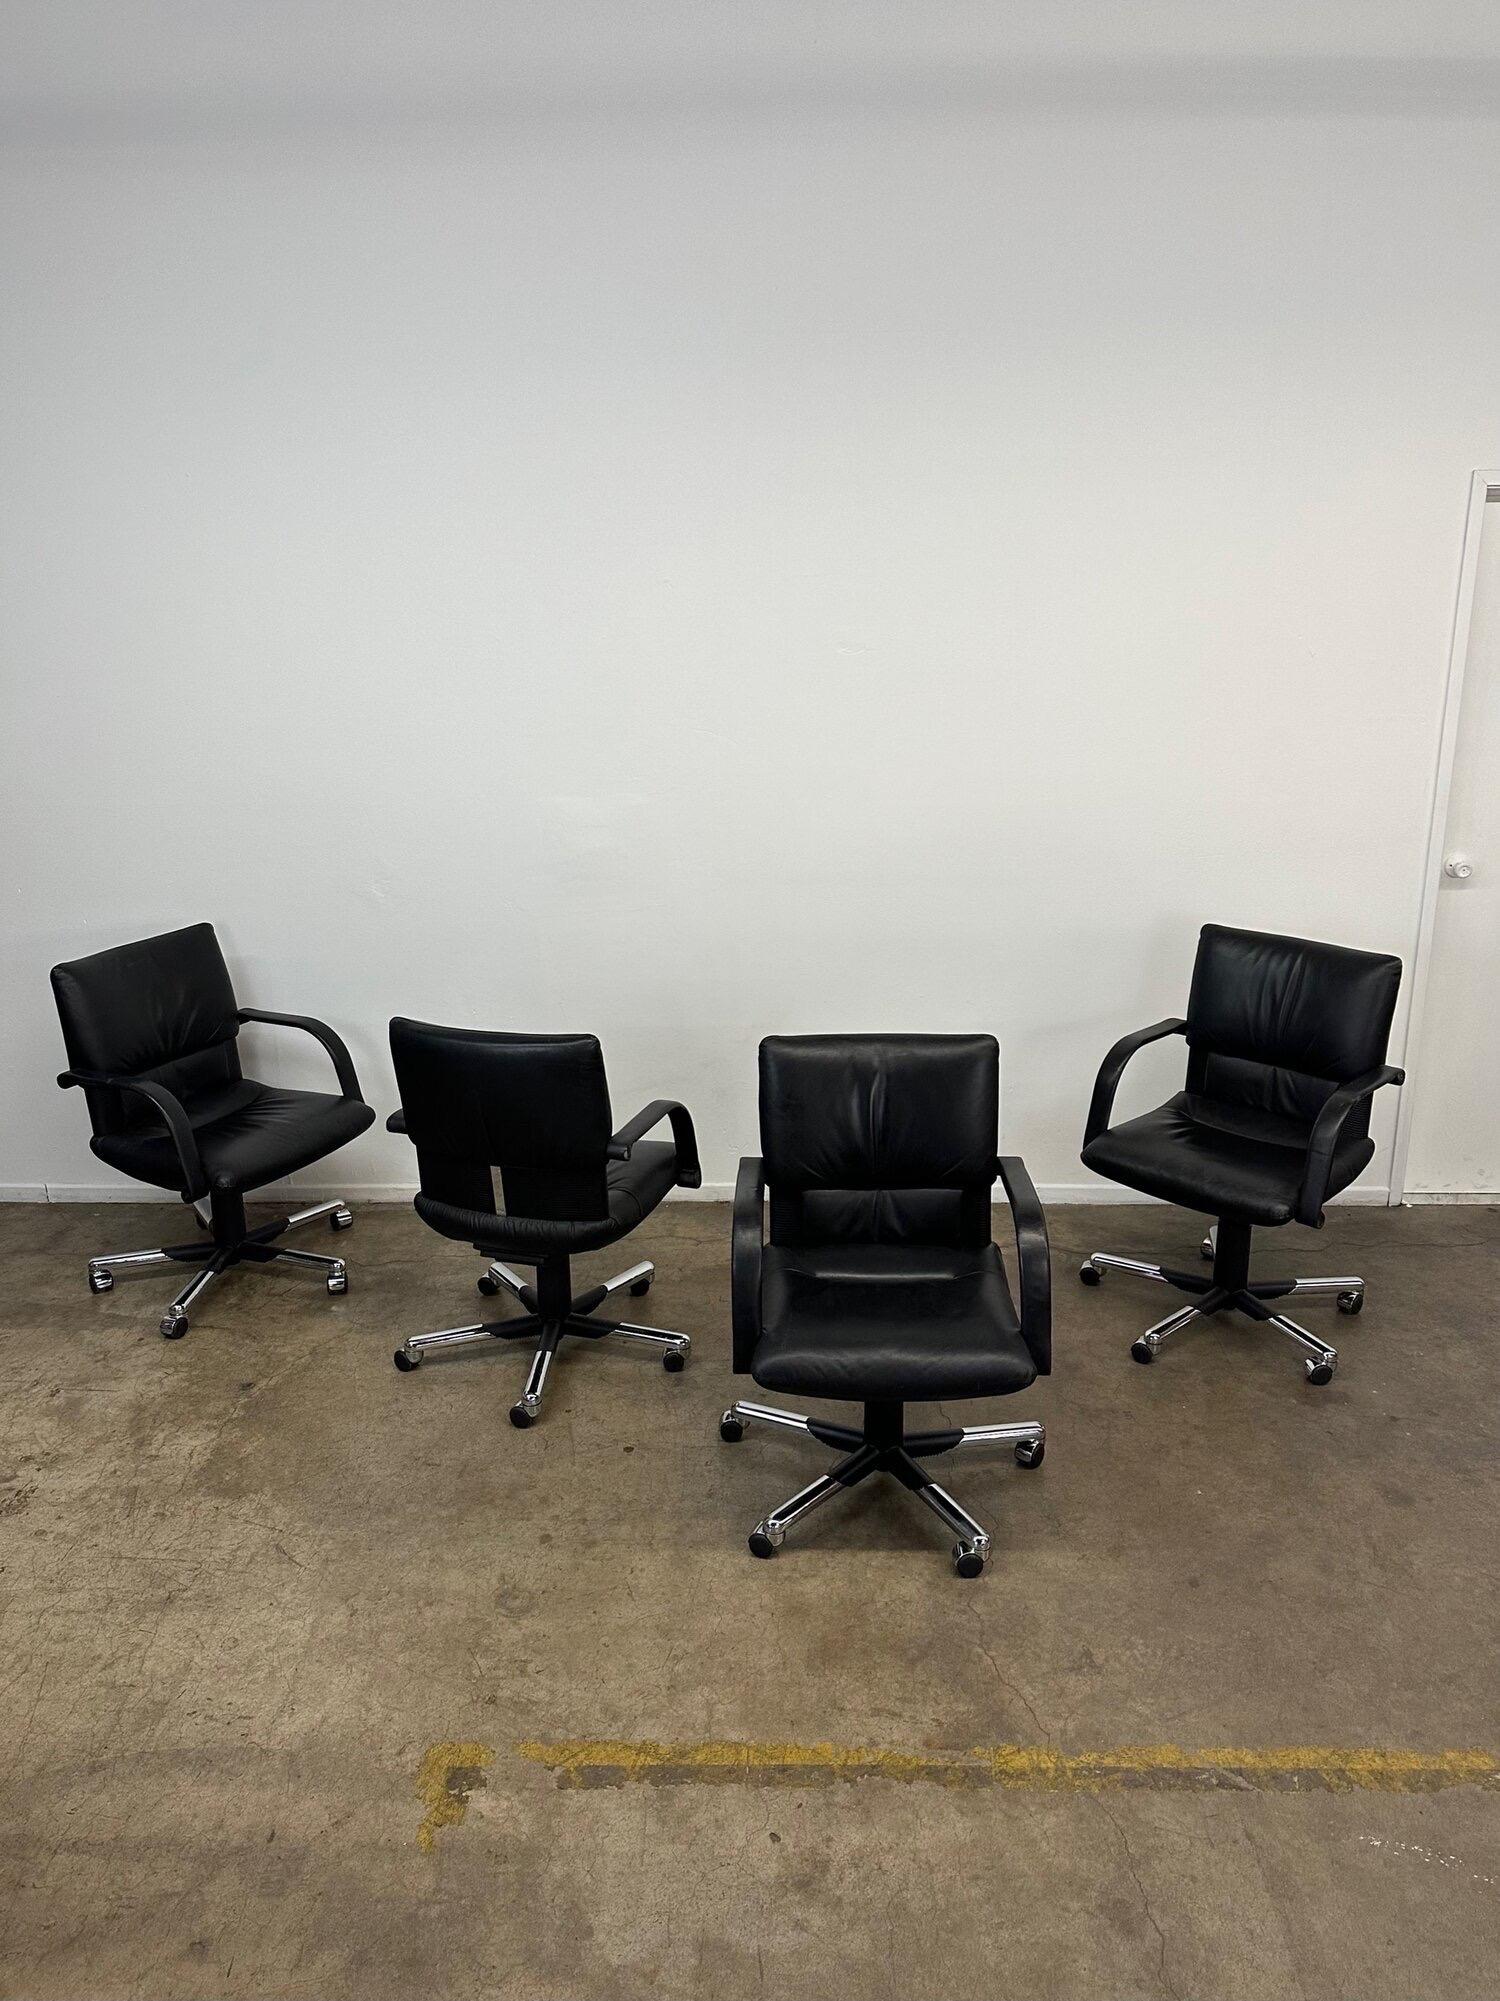 W25 D27 H35 SW20 SD17 SH17 AH25.5

Vintage German made leather office chairs. Price is per chair. Chairs are structurally sound and fully functional. Areas of wear have been pictured closely such as patina to leather and scuff marks. Price is per